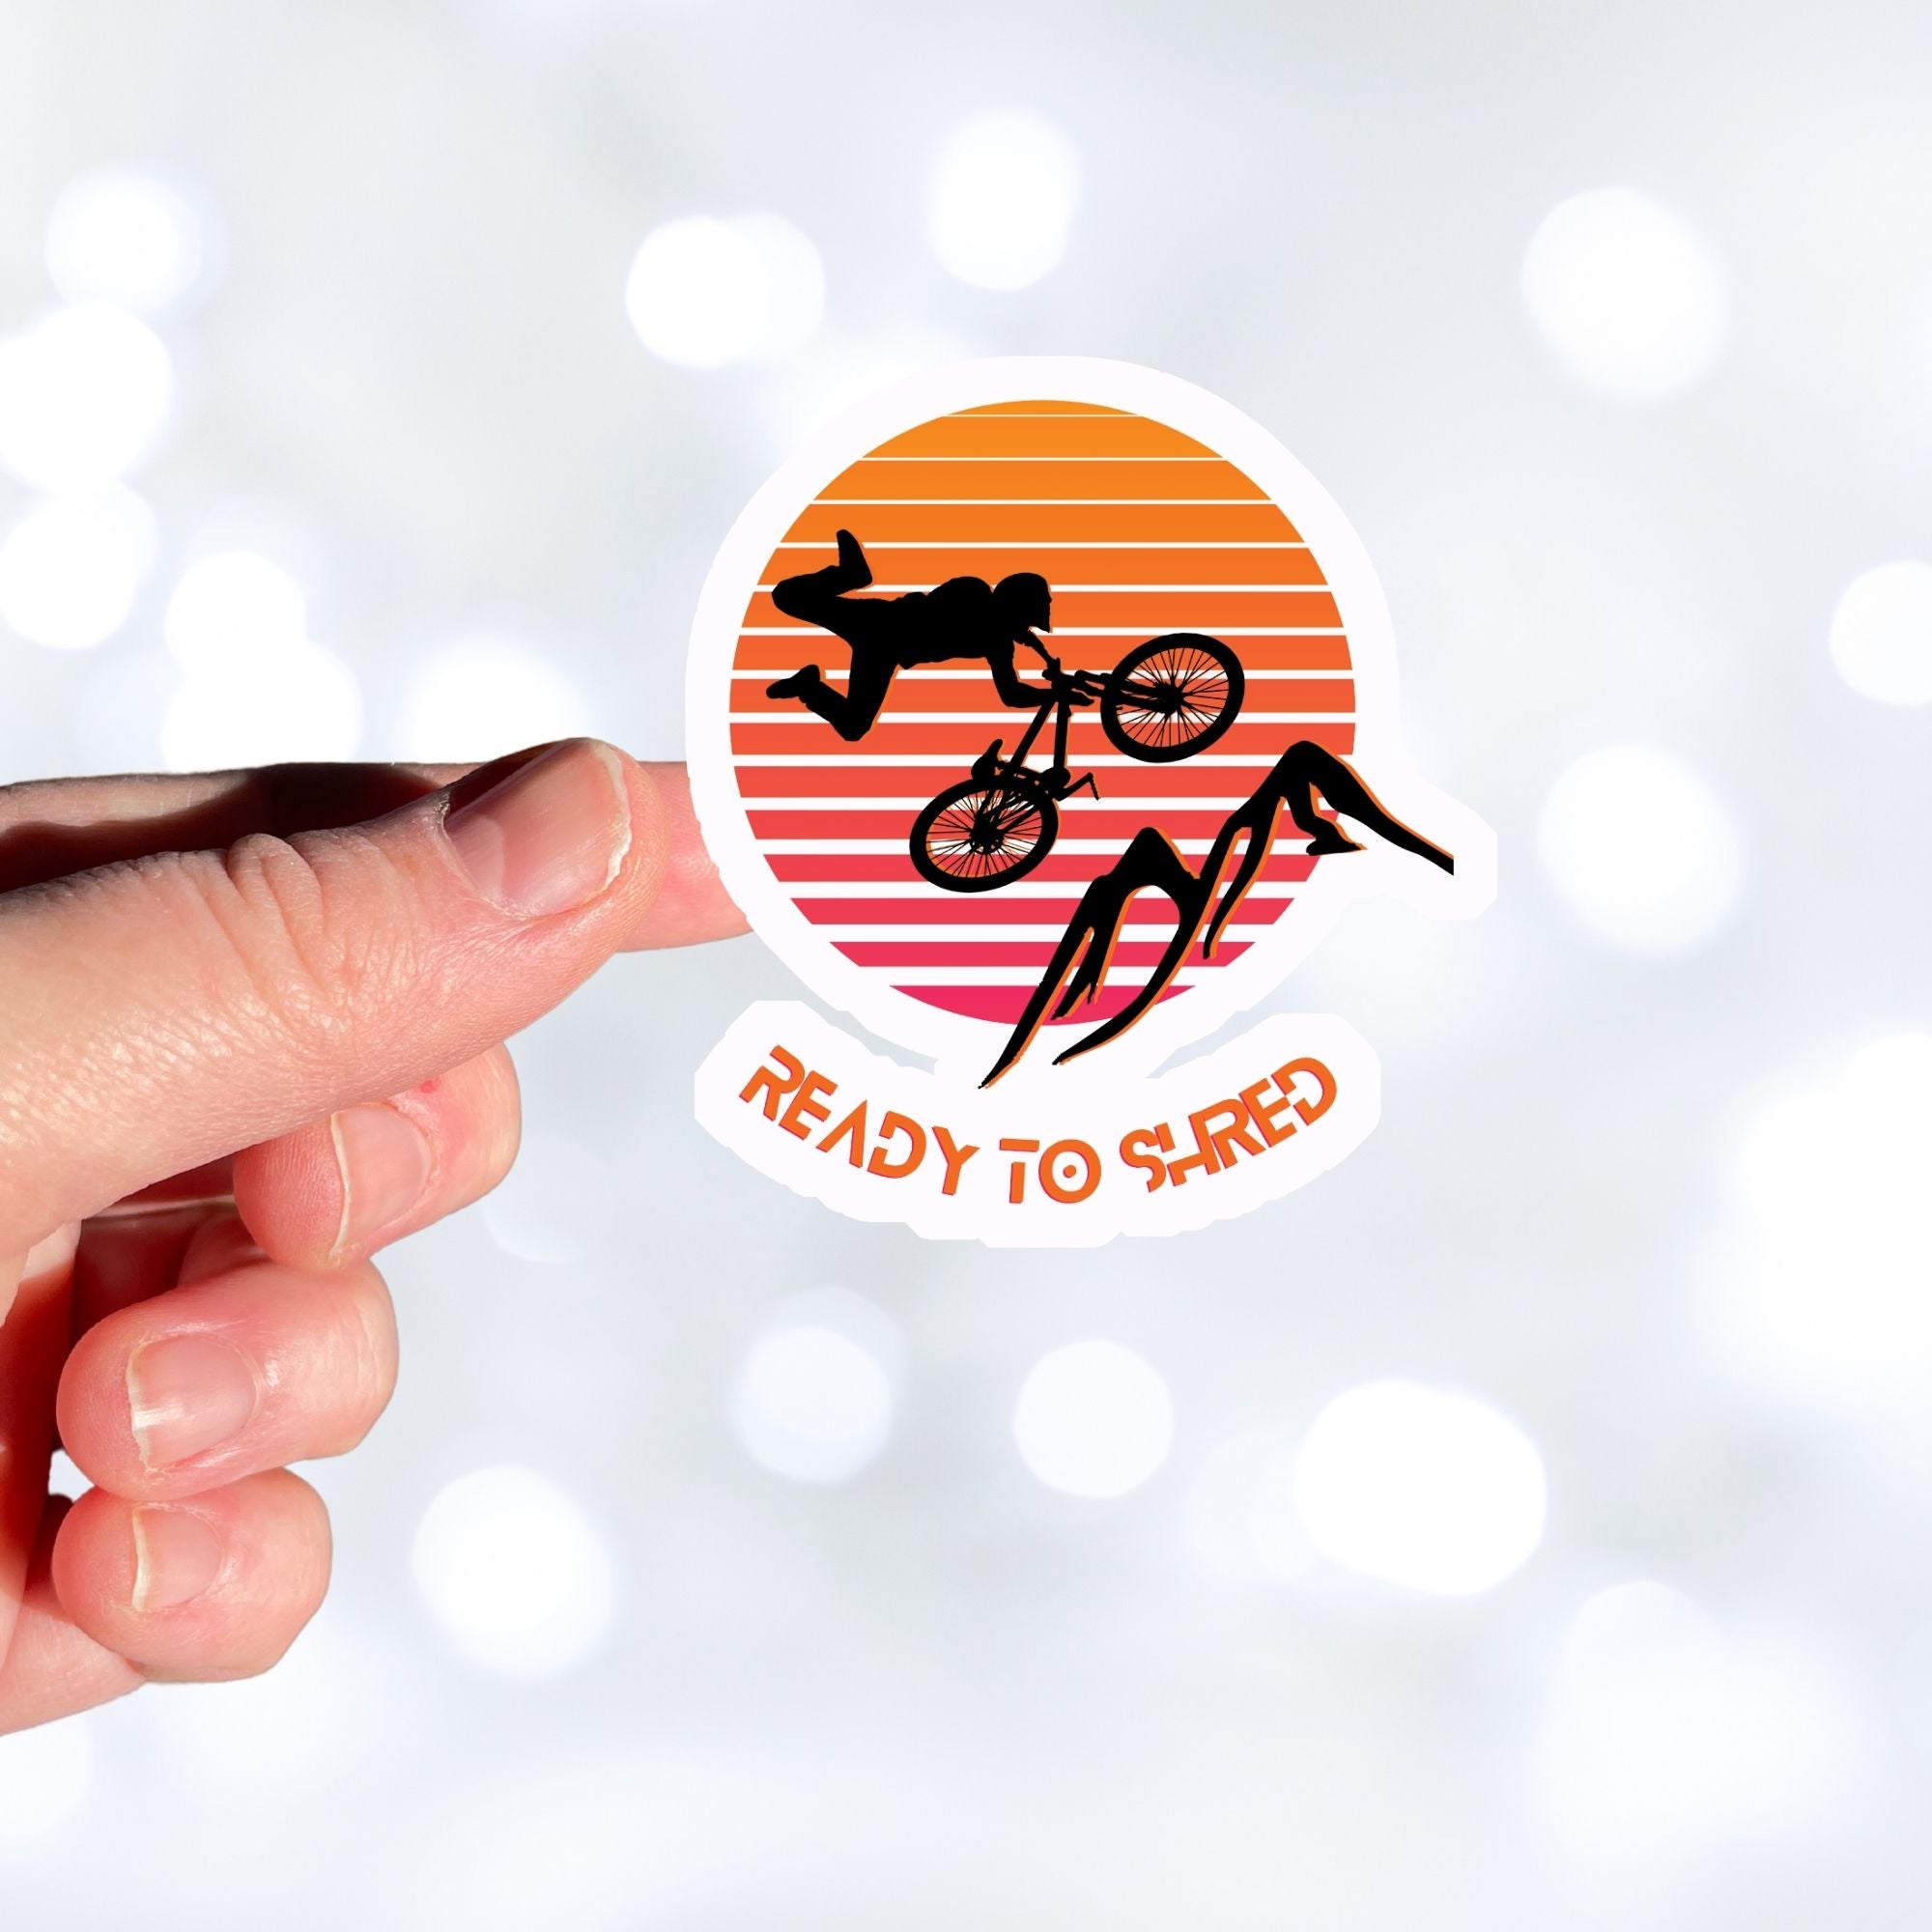 Grab your off-road bicycle and hit the trails! This individual die-cut sticker features the silhouette of a mountain biker flying above mountains, on an orange and white gradient background, with the words "Ready to Shred" below. This image shows a hand holding the mountain bike sticker.